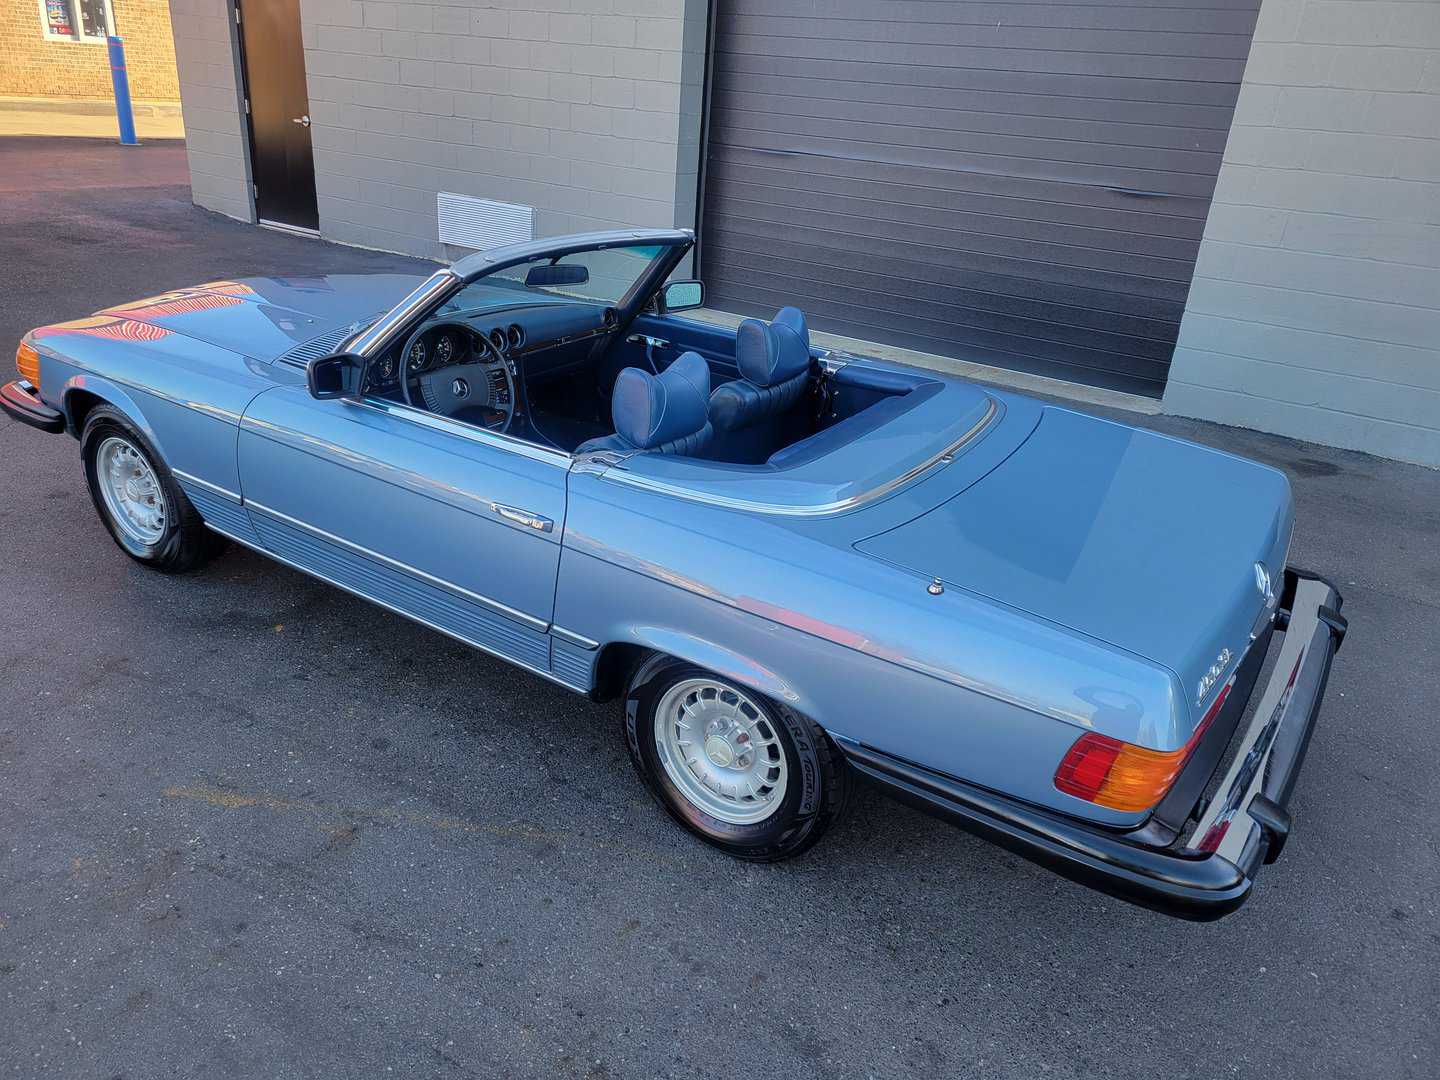 A Blue Mercedes Benz 450 Sl Convertible Parked In Front Of A Garage.